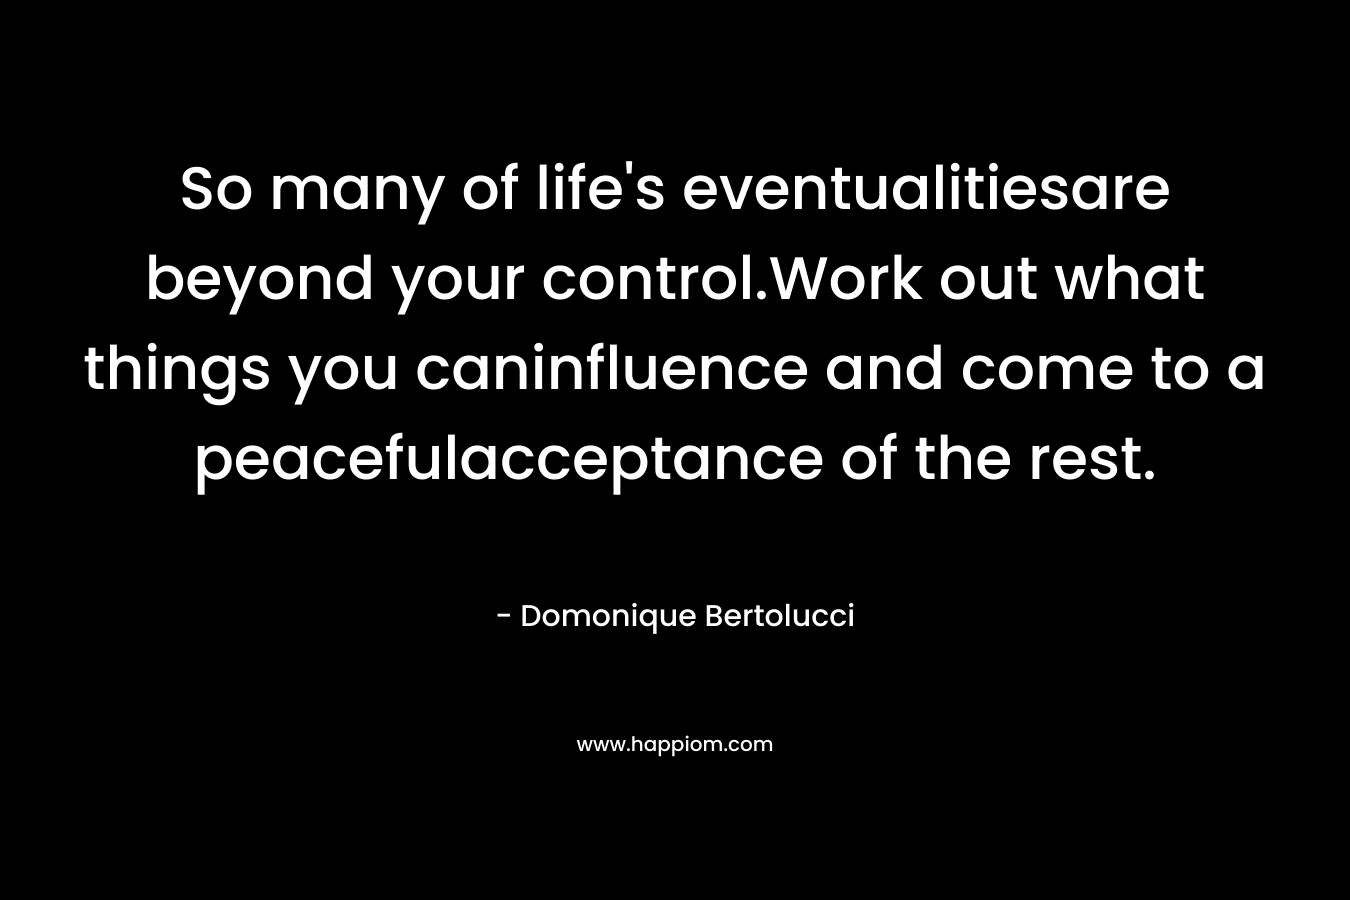 So many of life’s eventualitiesare beyond your control.Work out what things you caninfluence and come to a peacefulacceptance of the rest. – Domonique Bertolucci